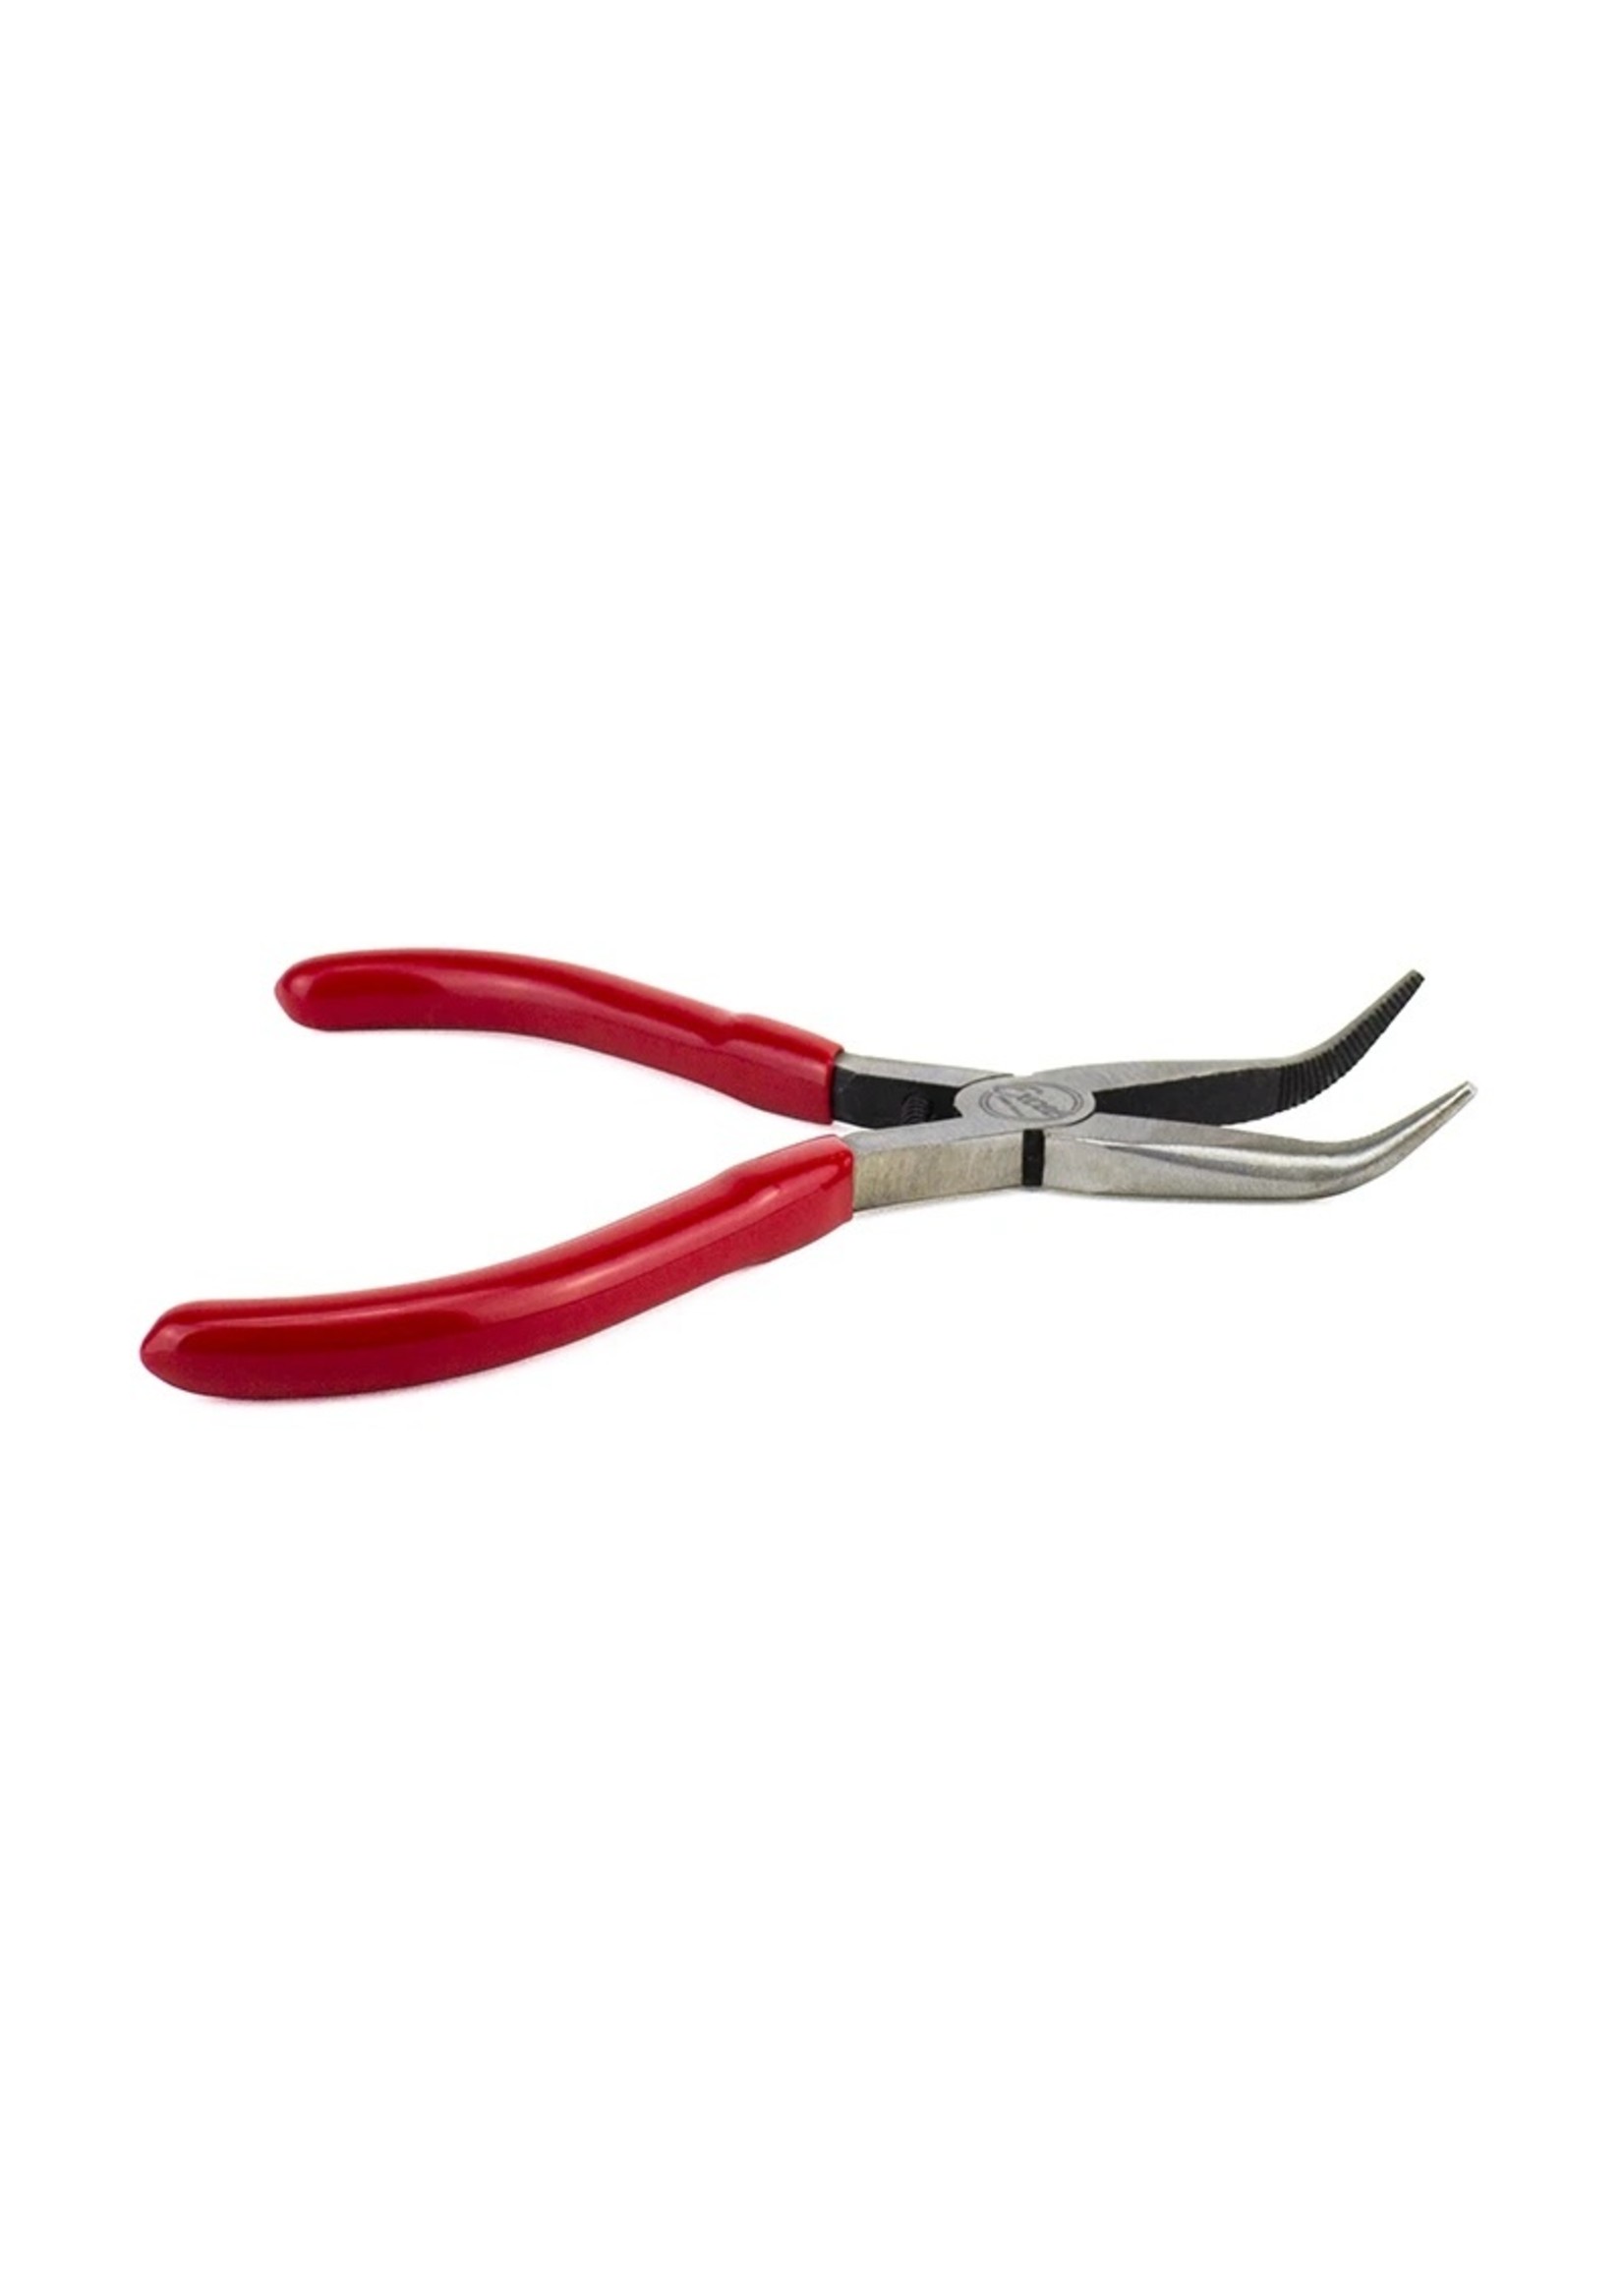 Excel 55590 - Bent Nose Pliers - Hub Hobby